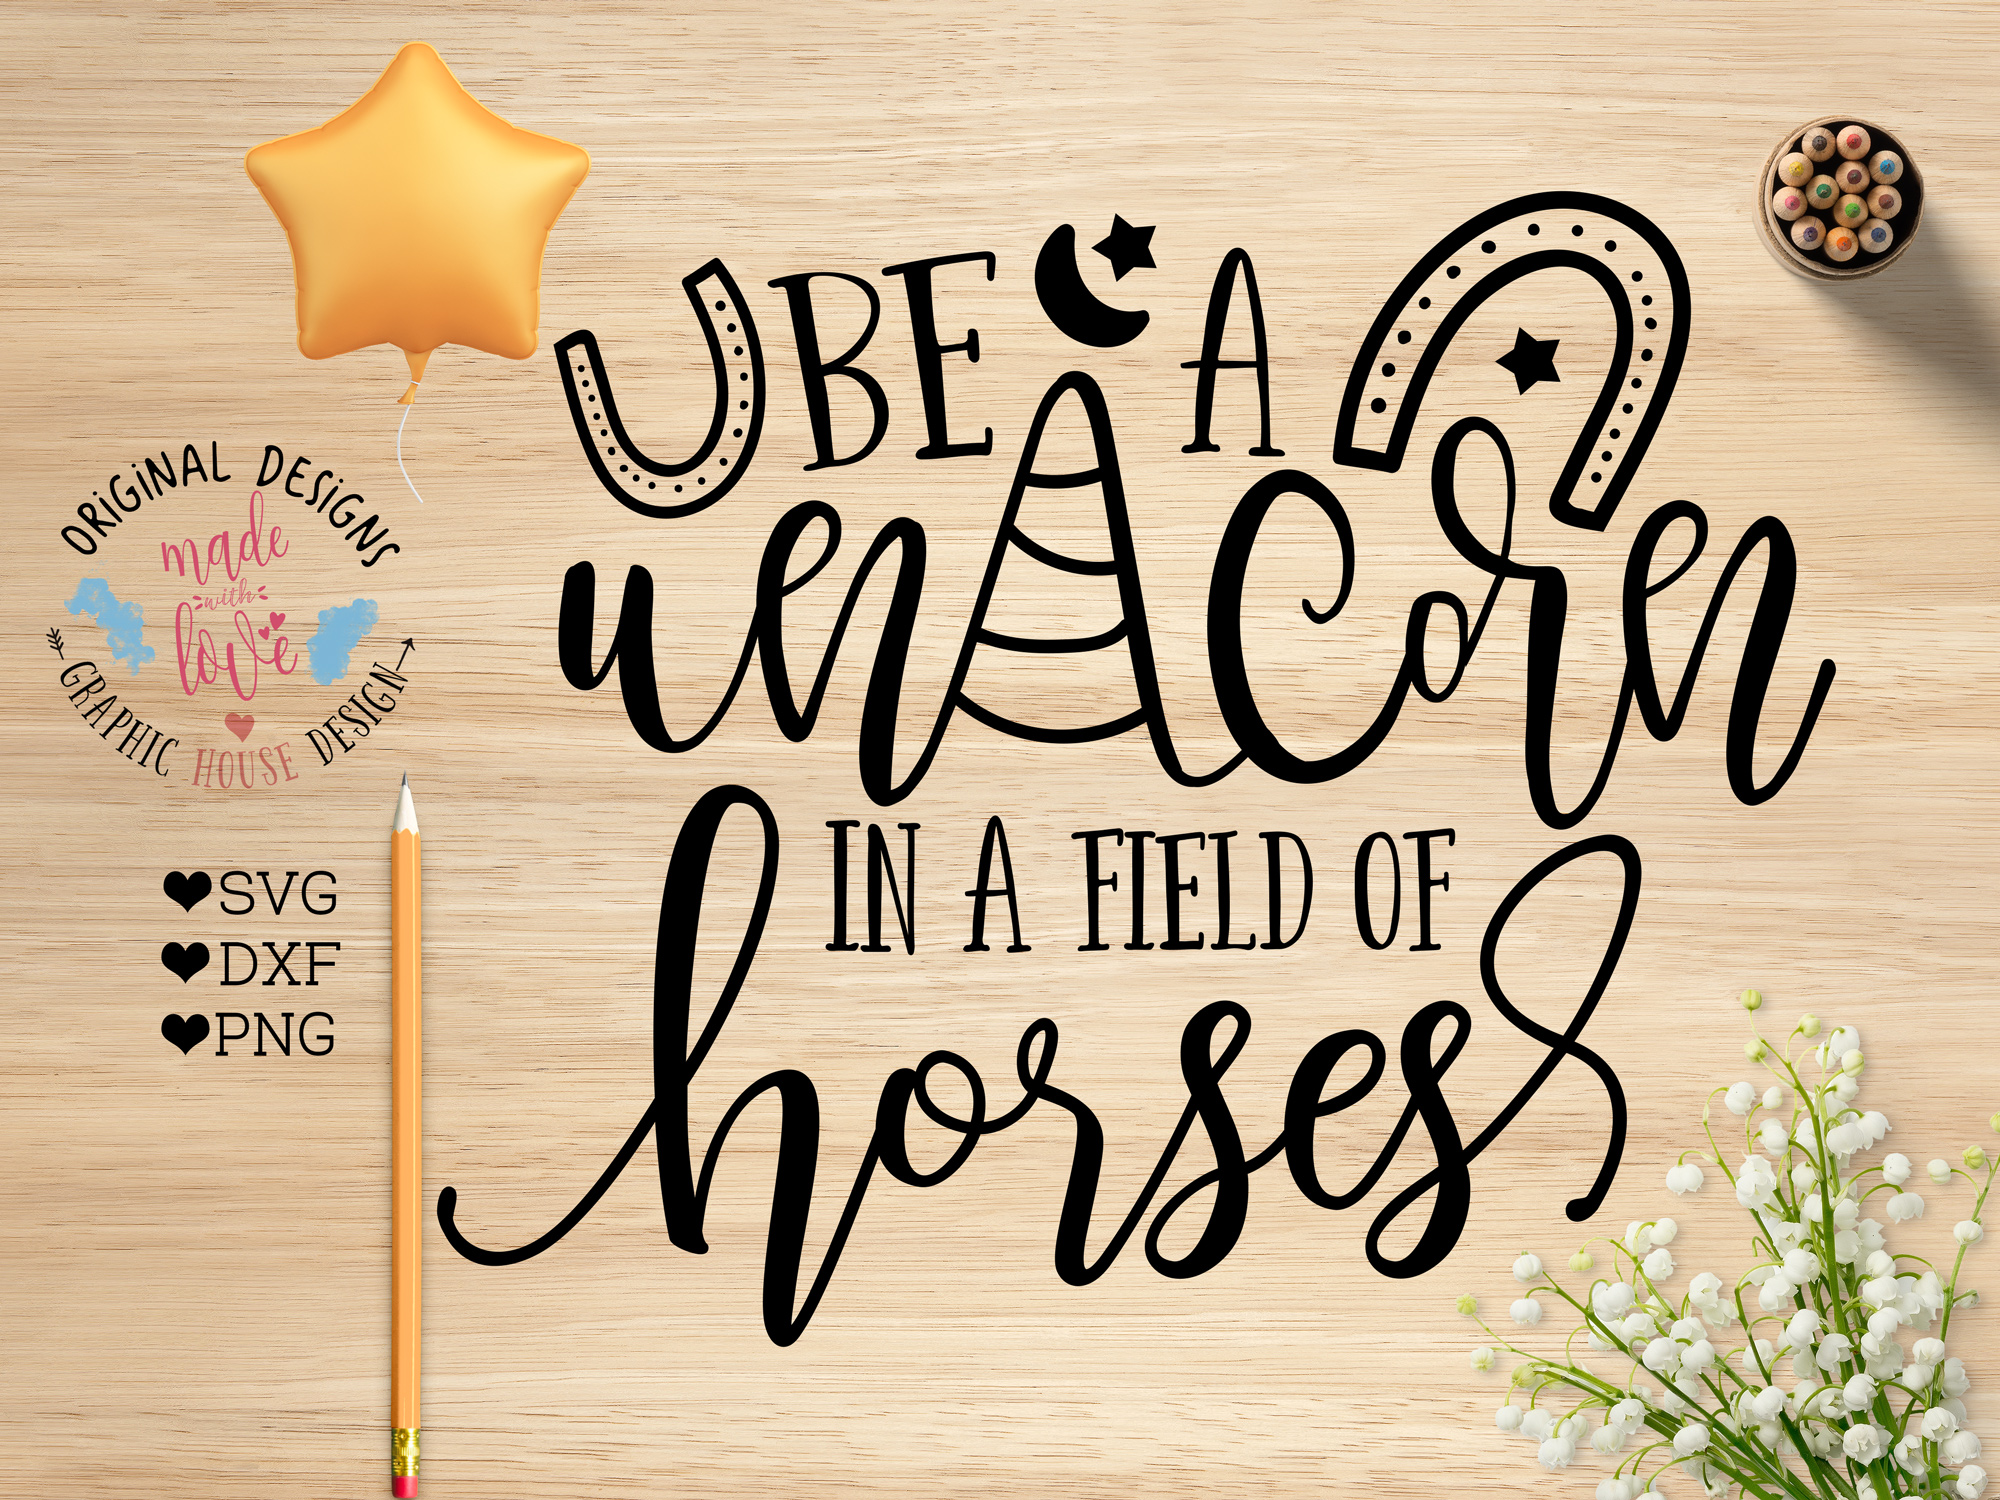 be-a-unicorn-in-a-field-of-horses-cut-file-svg-dxf-png